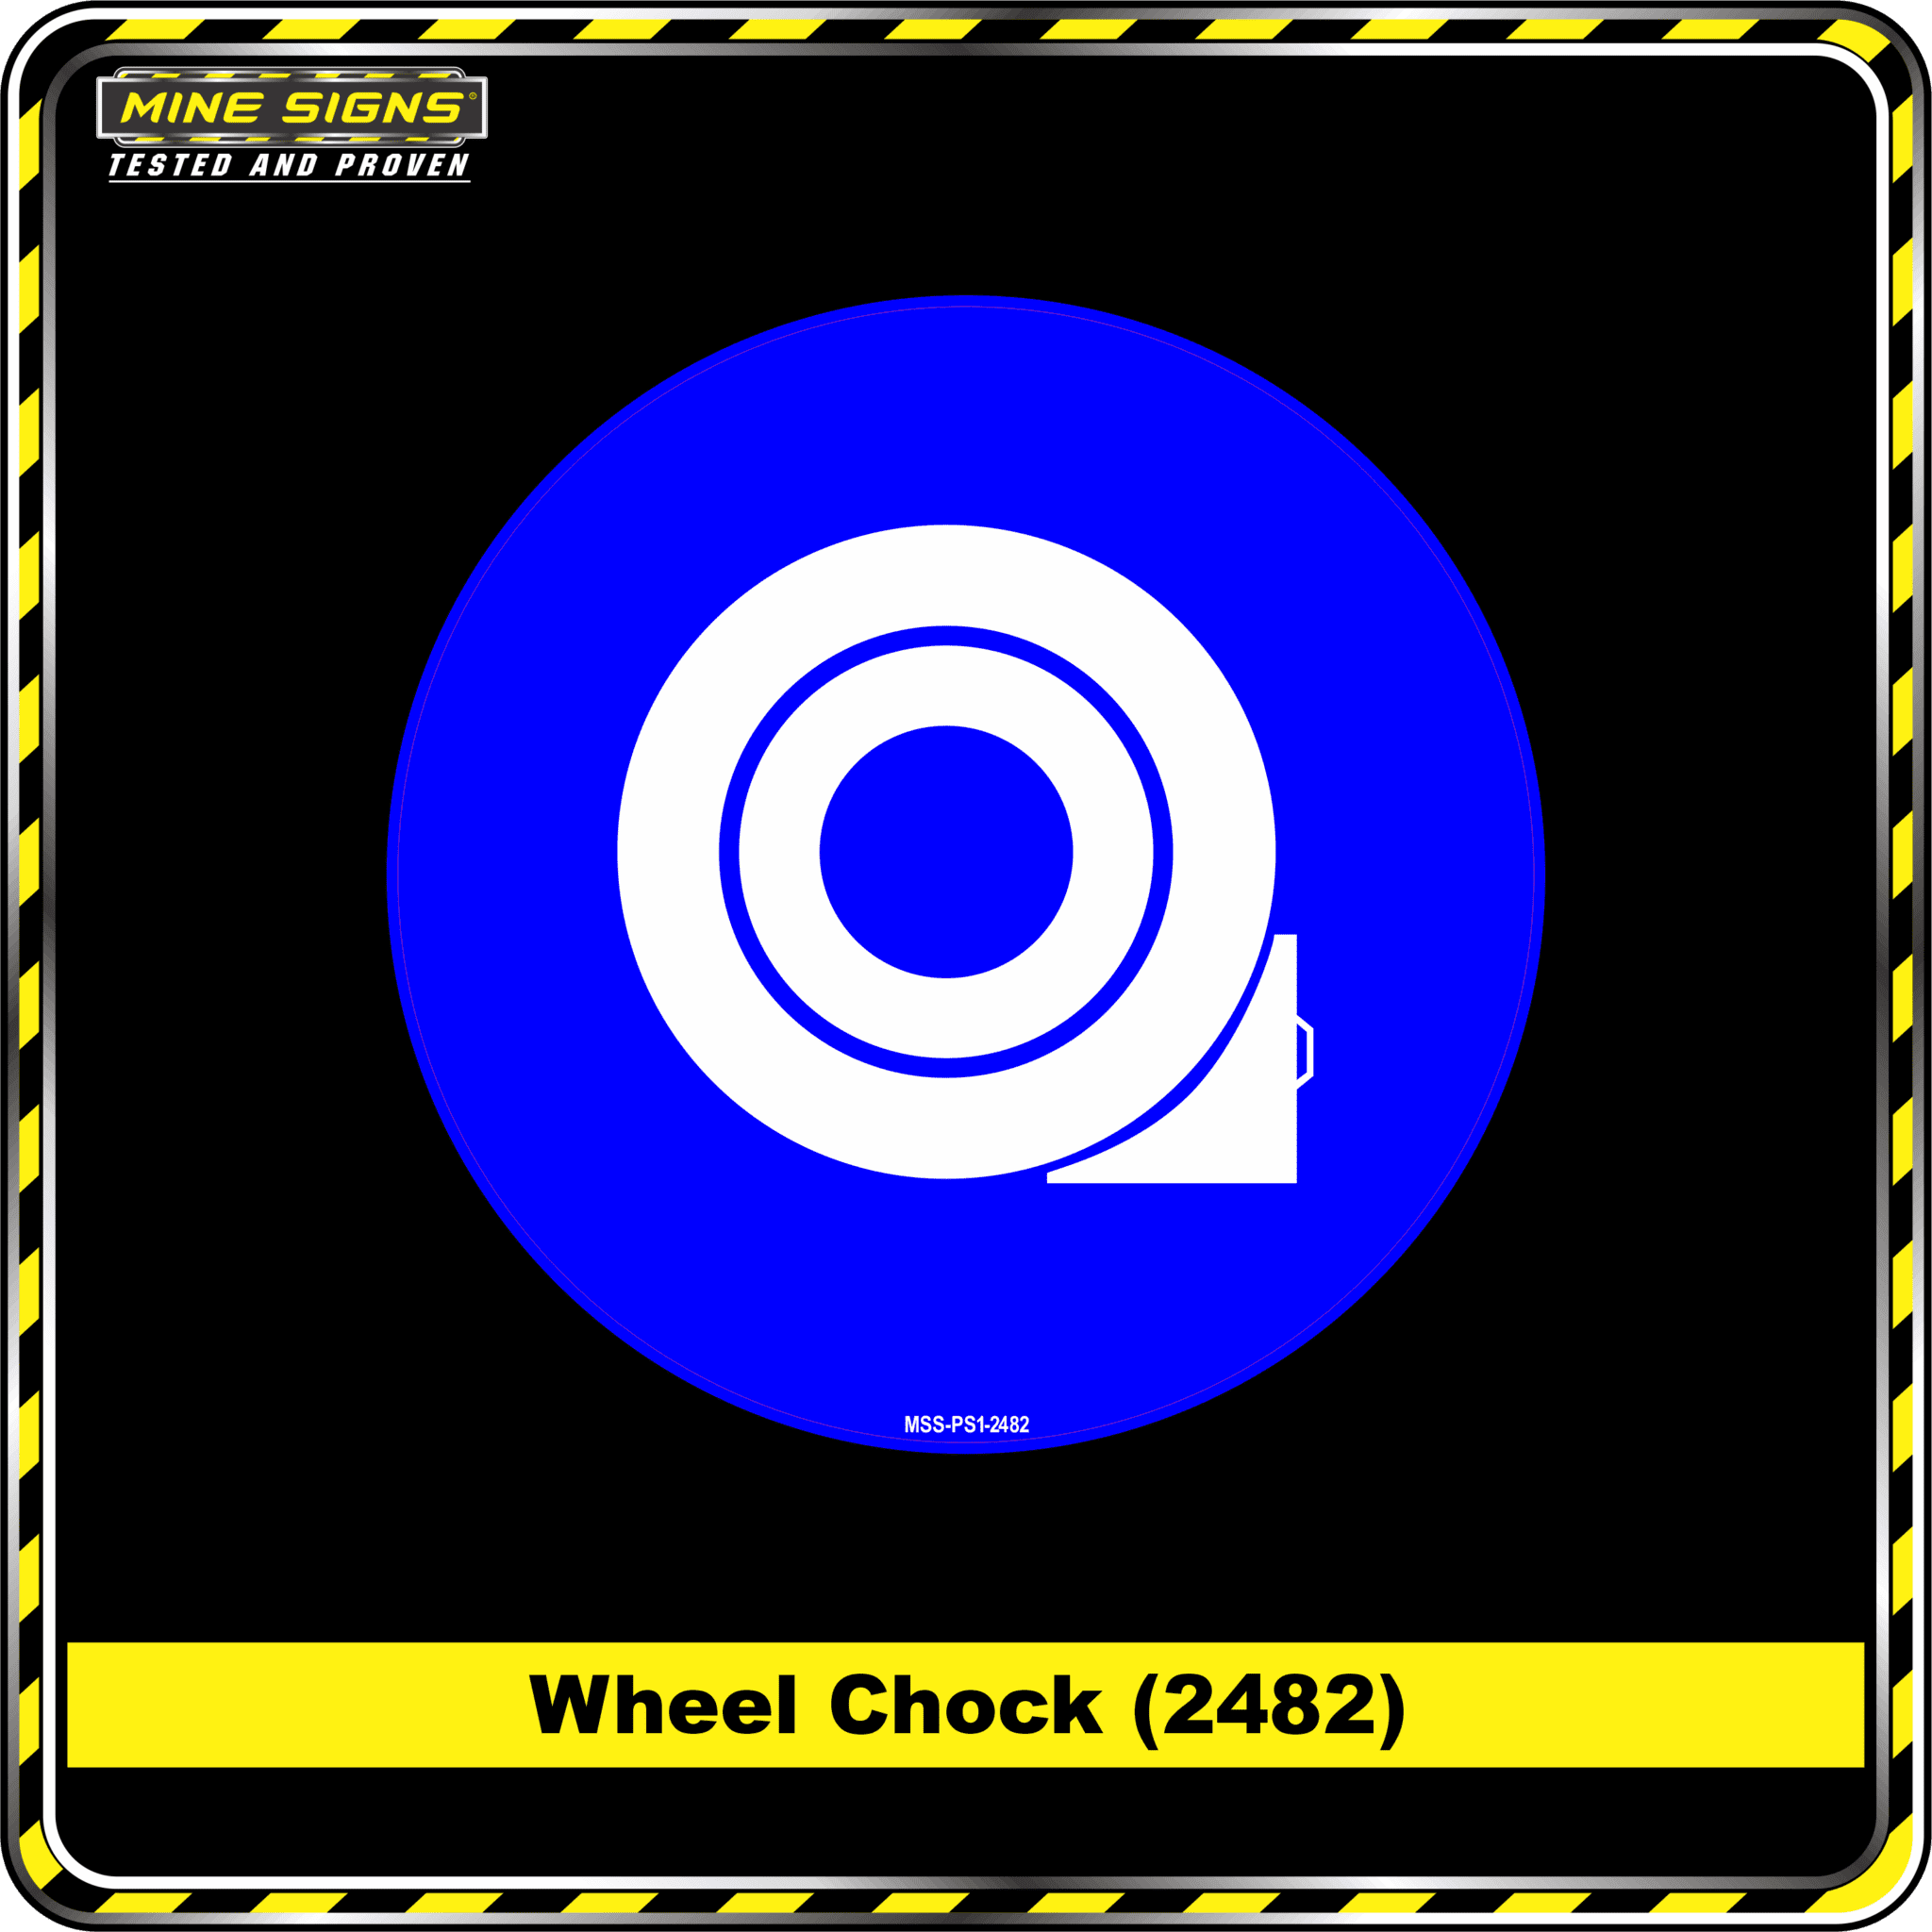 MS - Product Background - Safety Signs - Wheel Chock 2482